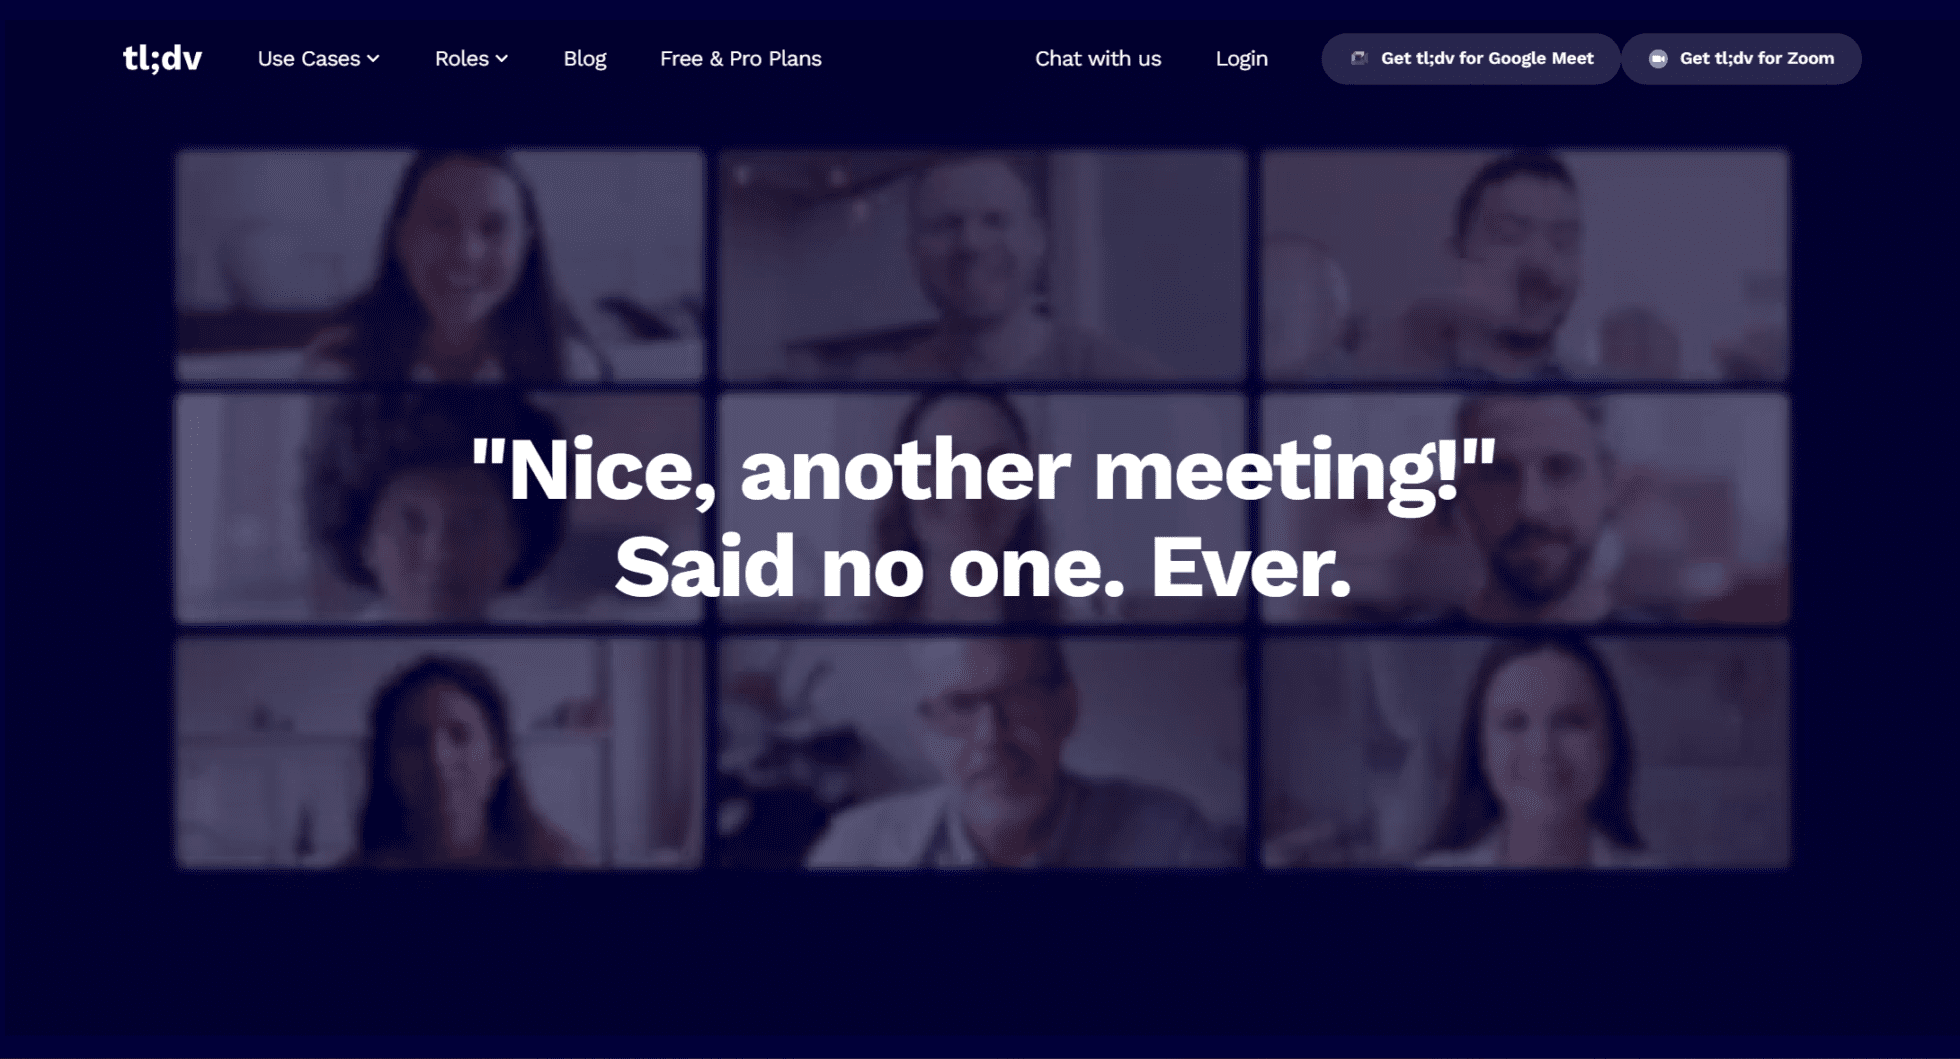 tl;dv homepage with the quote: "Nice, another meeting" Said no one. Ever.